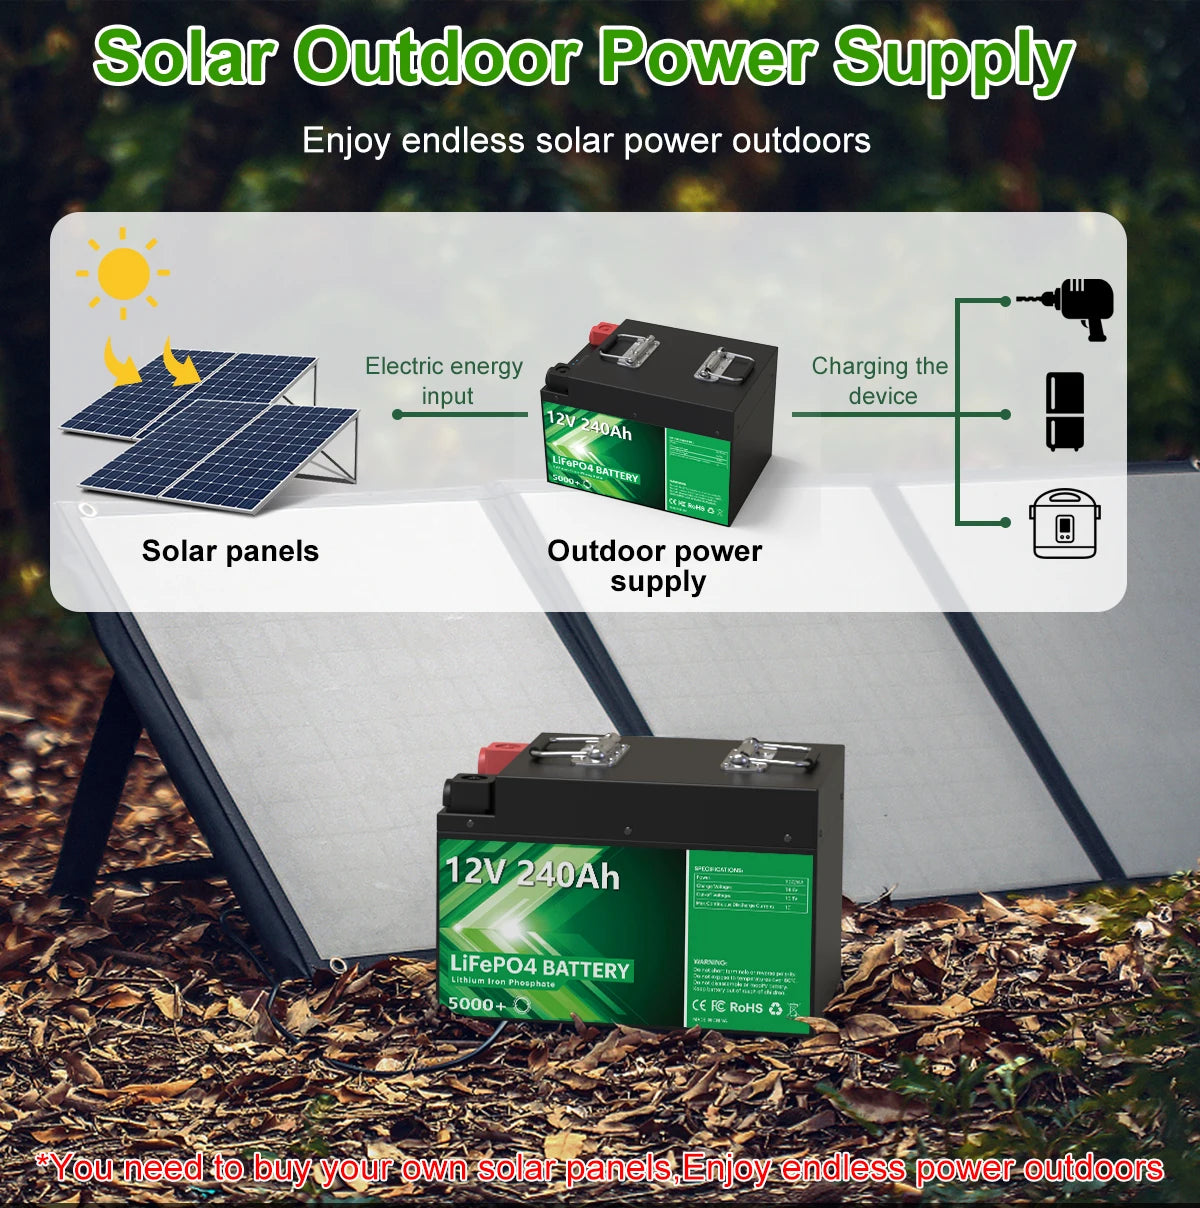 12V 240Ah 200Ah LiFePO4 Battery, Rechargeable LiFePO4 battery pack with 12V/240Ah capacity for outdoor enthusiasts, ideal for RVs and cars.